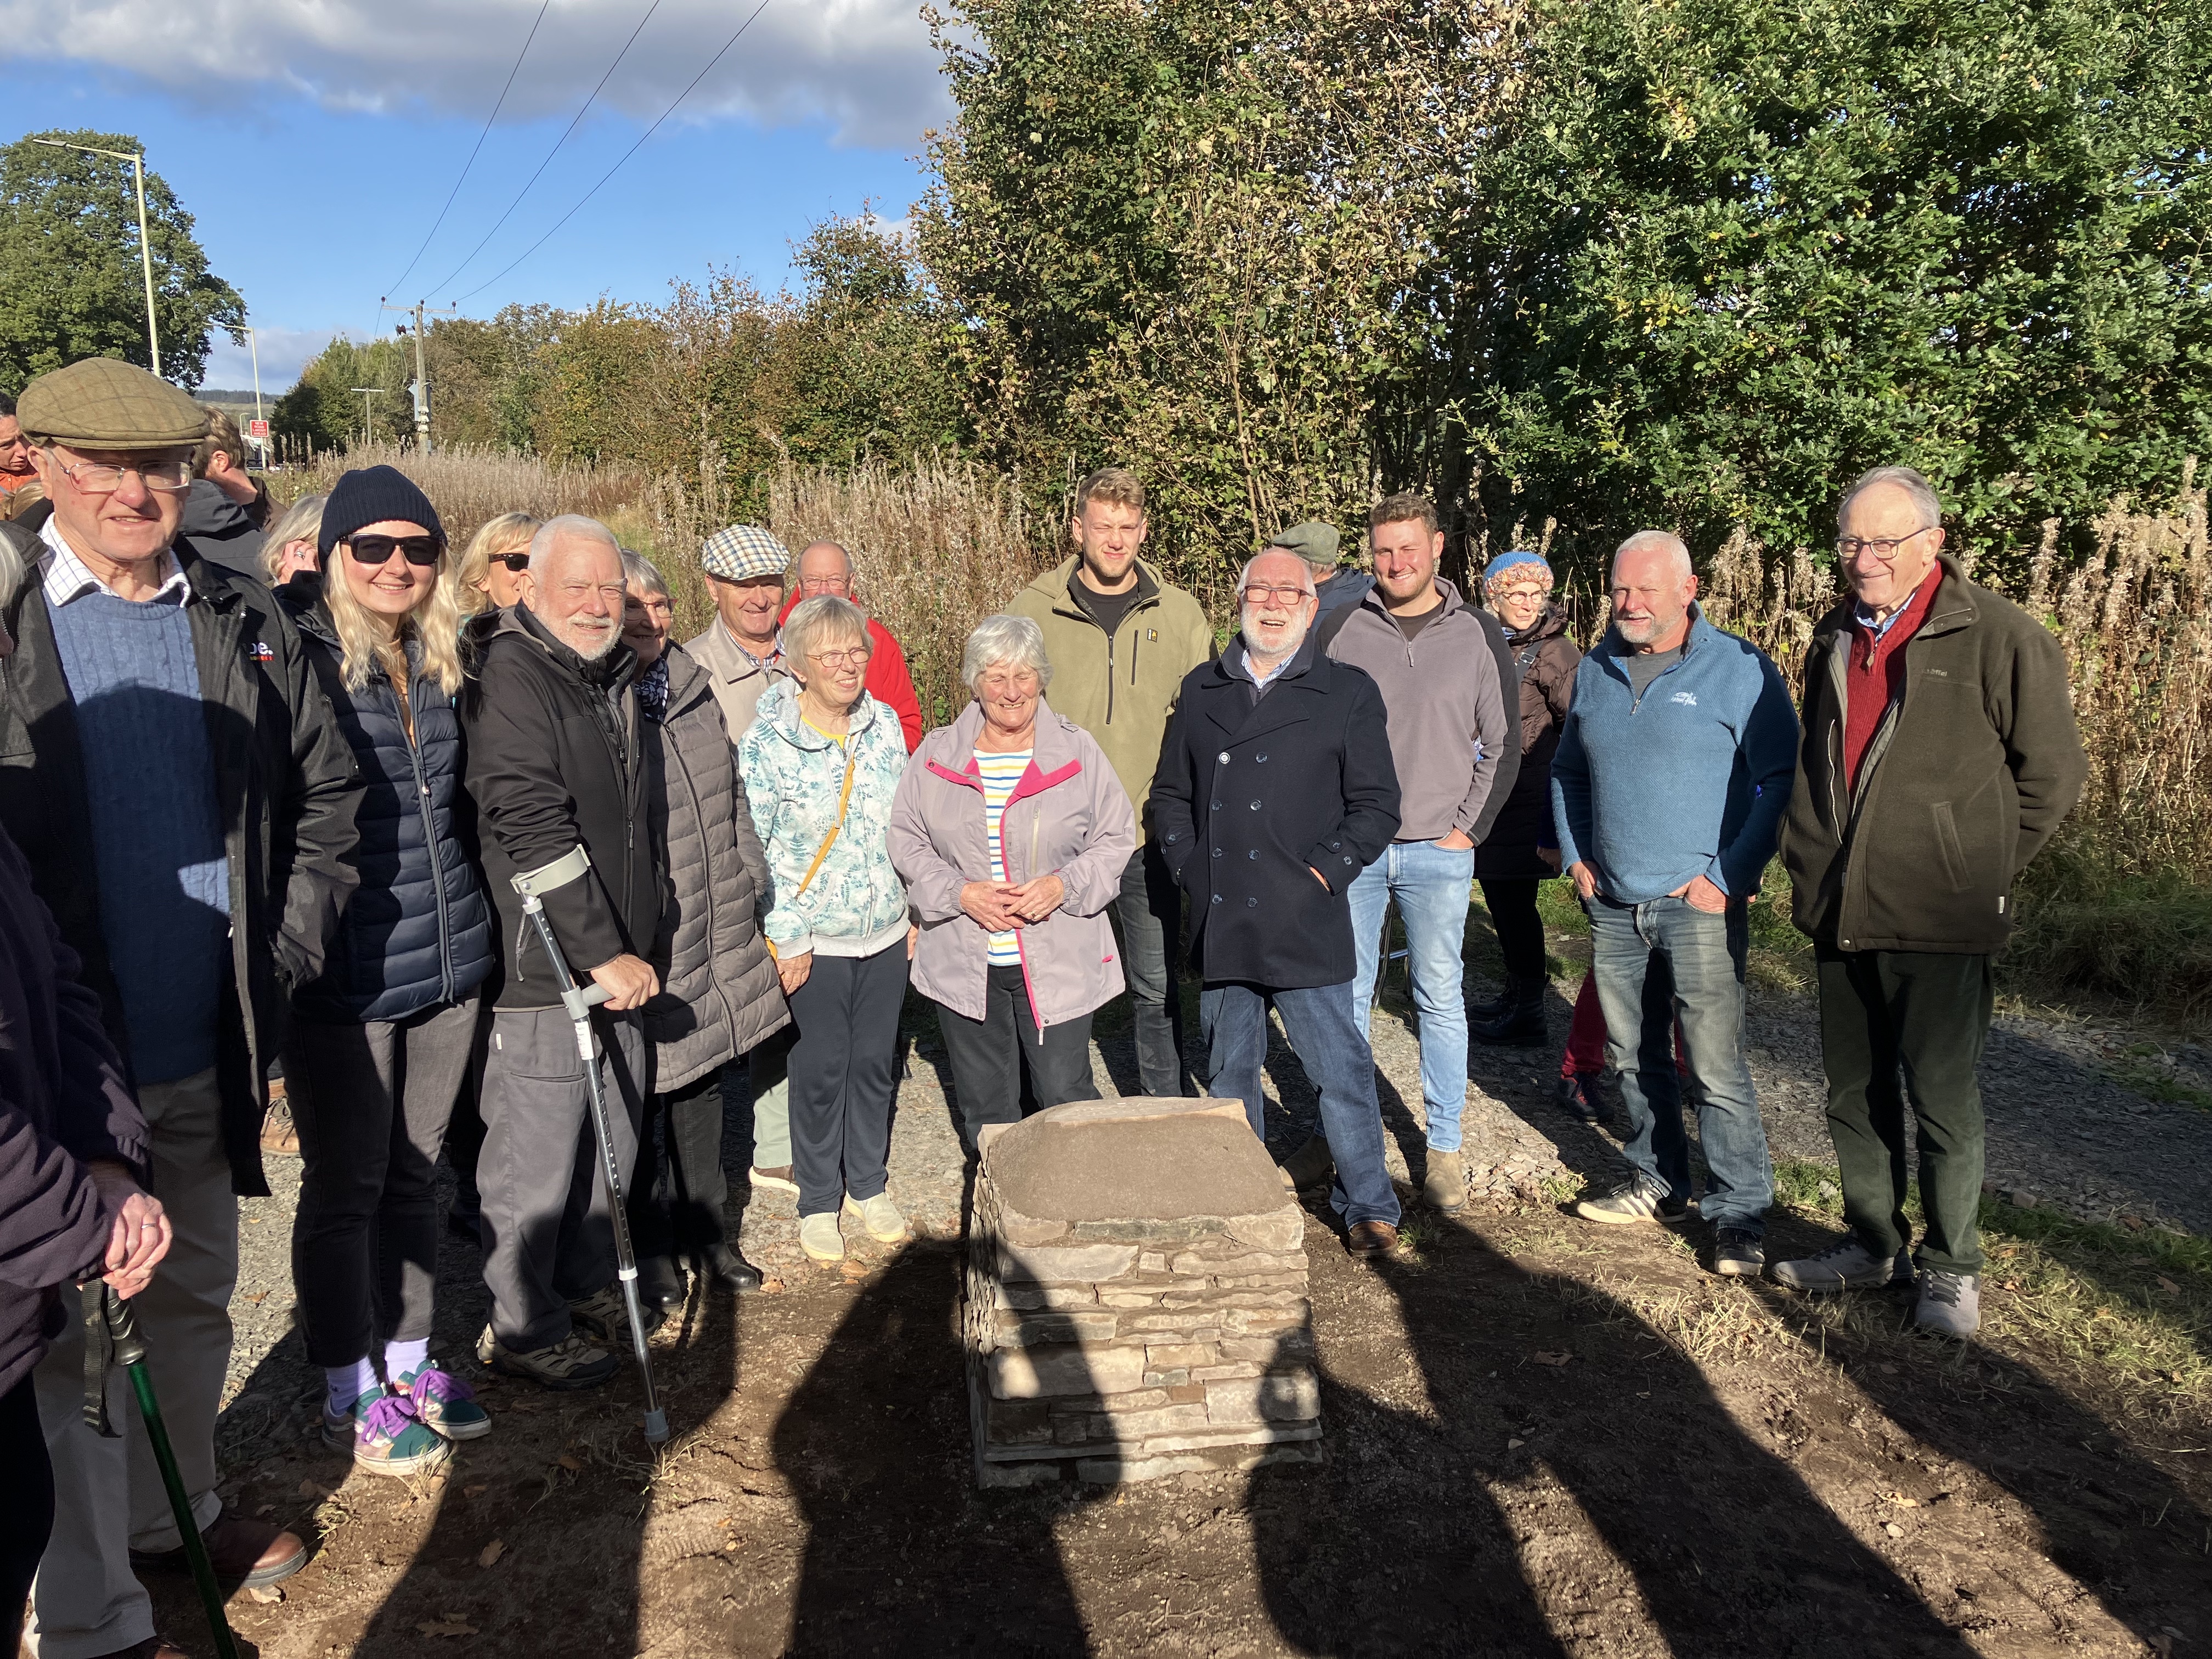 Members of Ardoch in Bloom, contractor Struan Donaldson and team, and villagers from Braco and Greenloaning celebrate the unveiling of the cairn to mark the finish of the wall restoration project